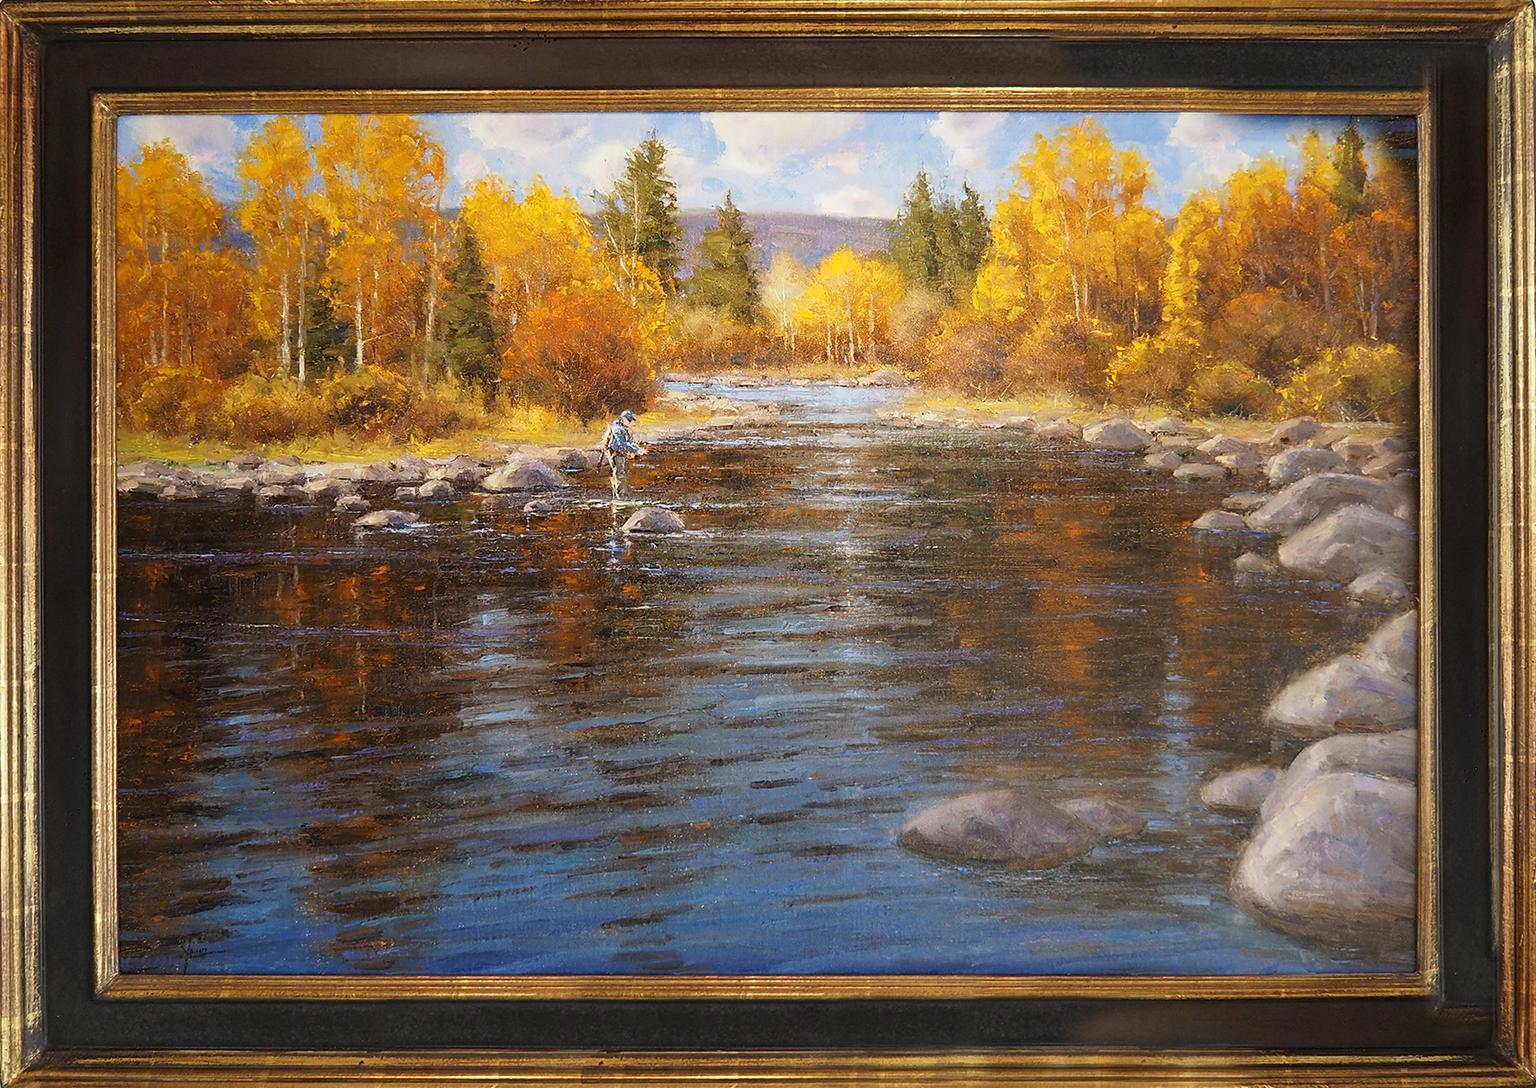 Dan Young Landscape Painting - A Fall Day to Remember (fly fishing, river, reflection, Fall colors)